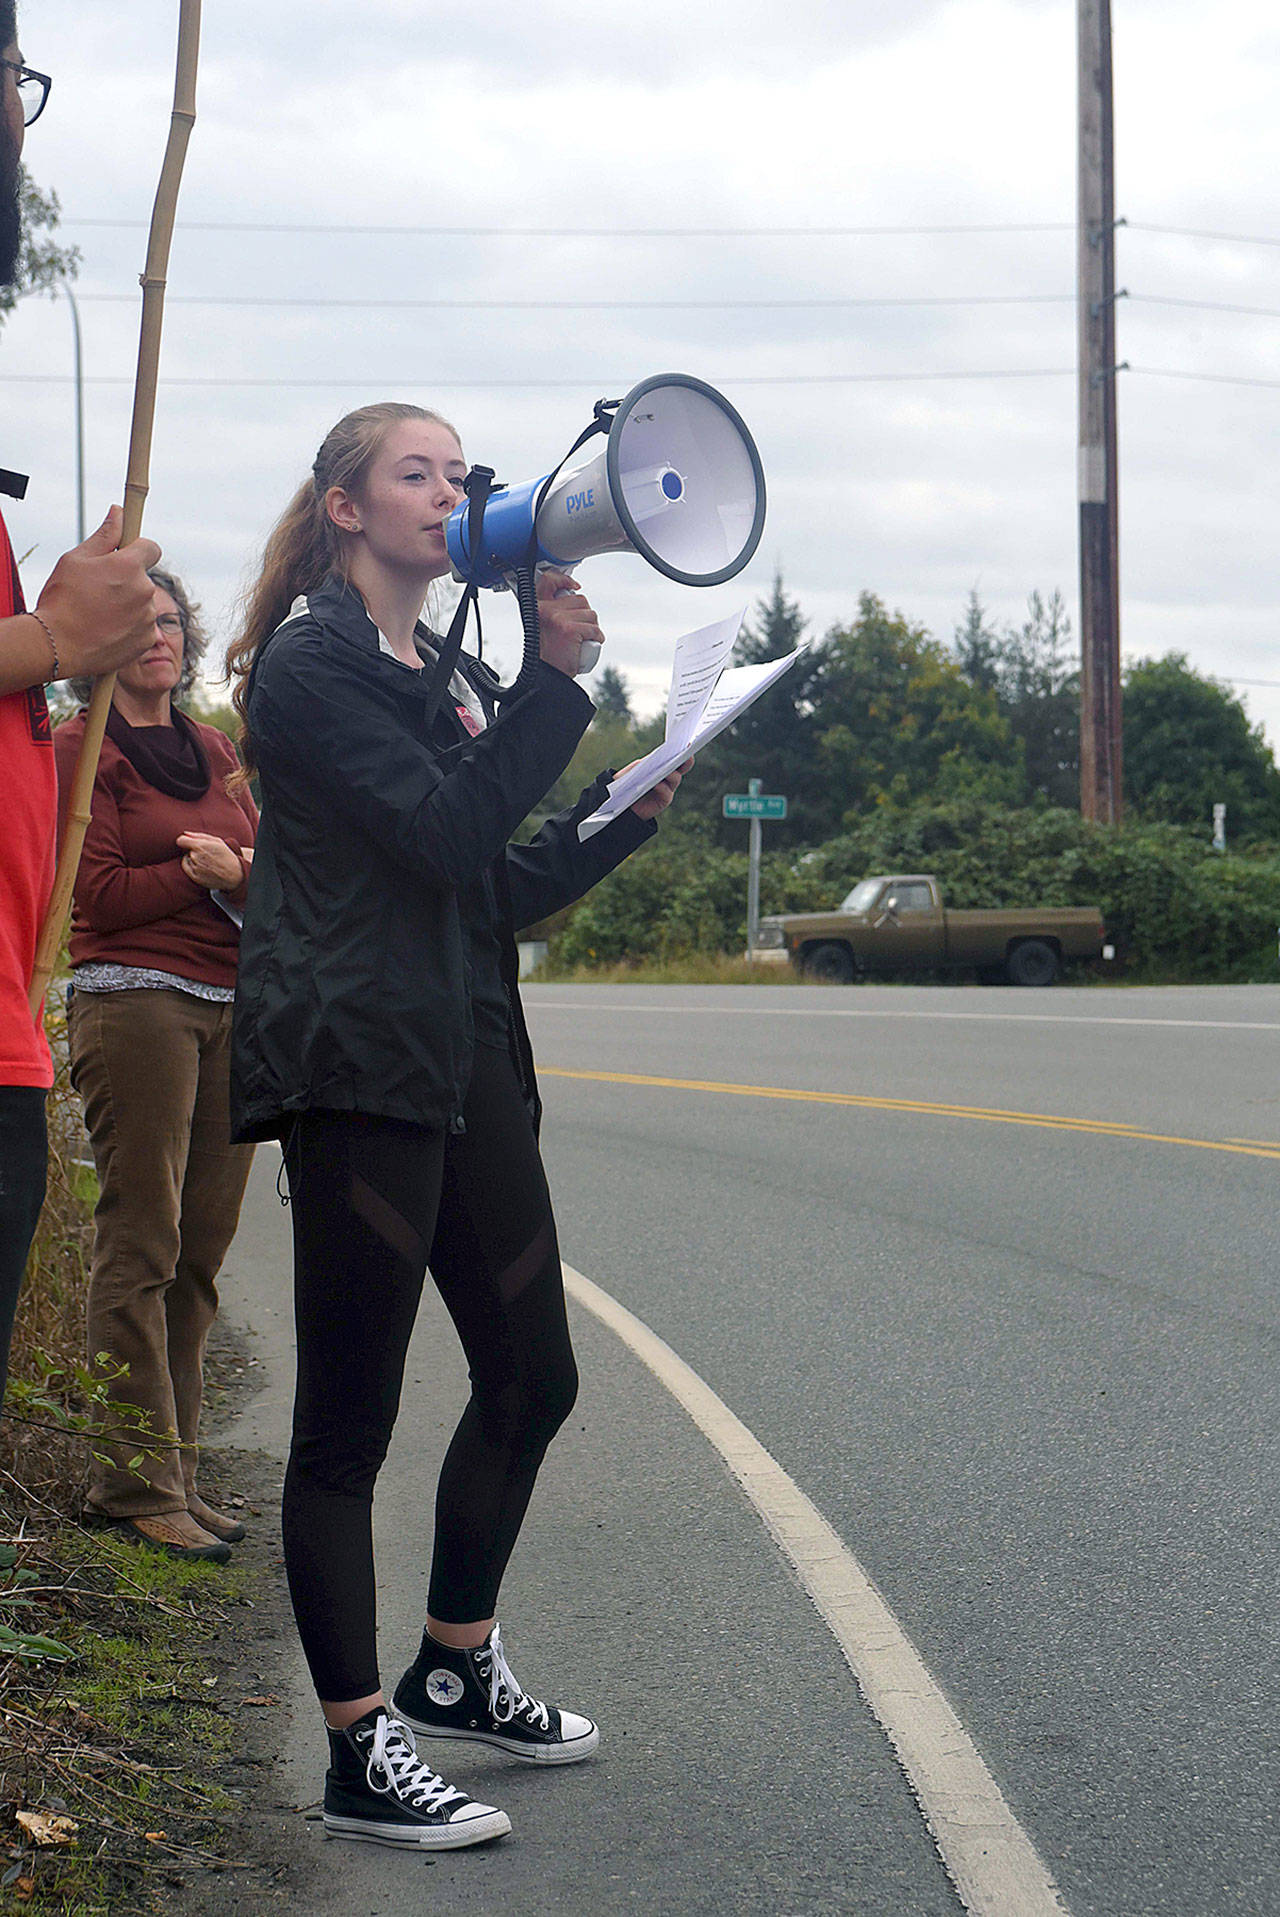 South Whidbey High School sophomore Annie Philp, one of the organizers, speaks at a climate change protest Friday.